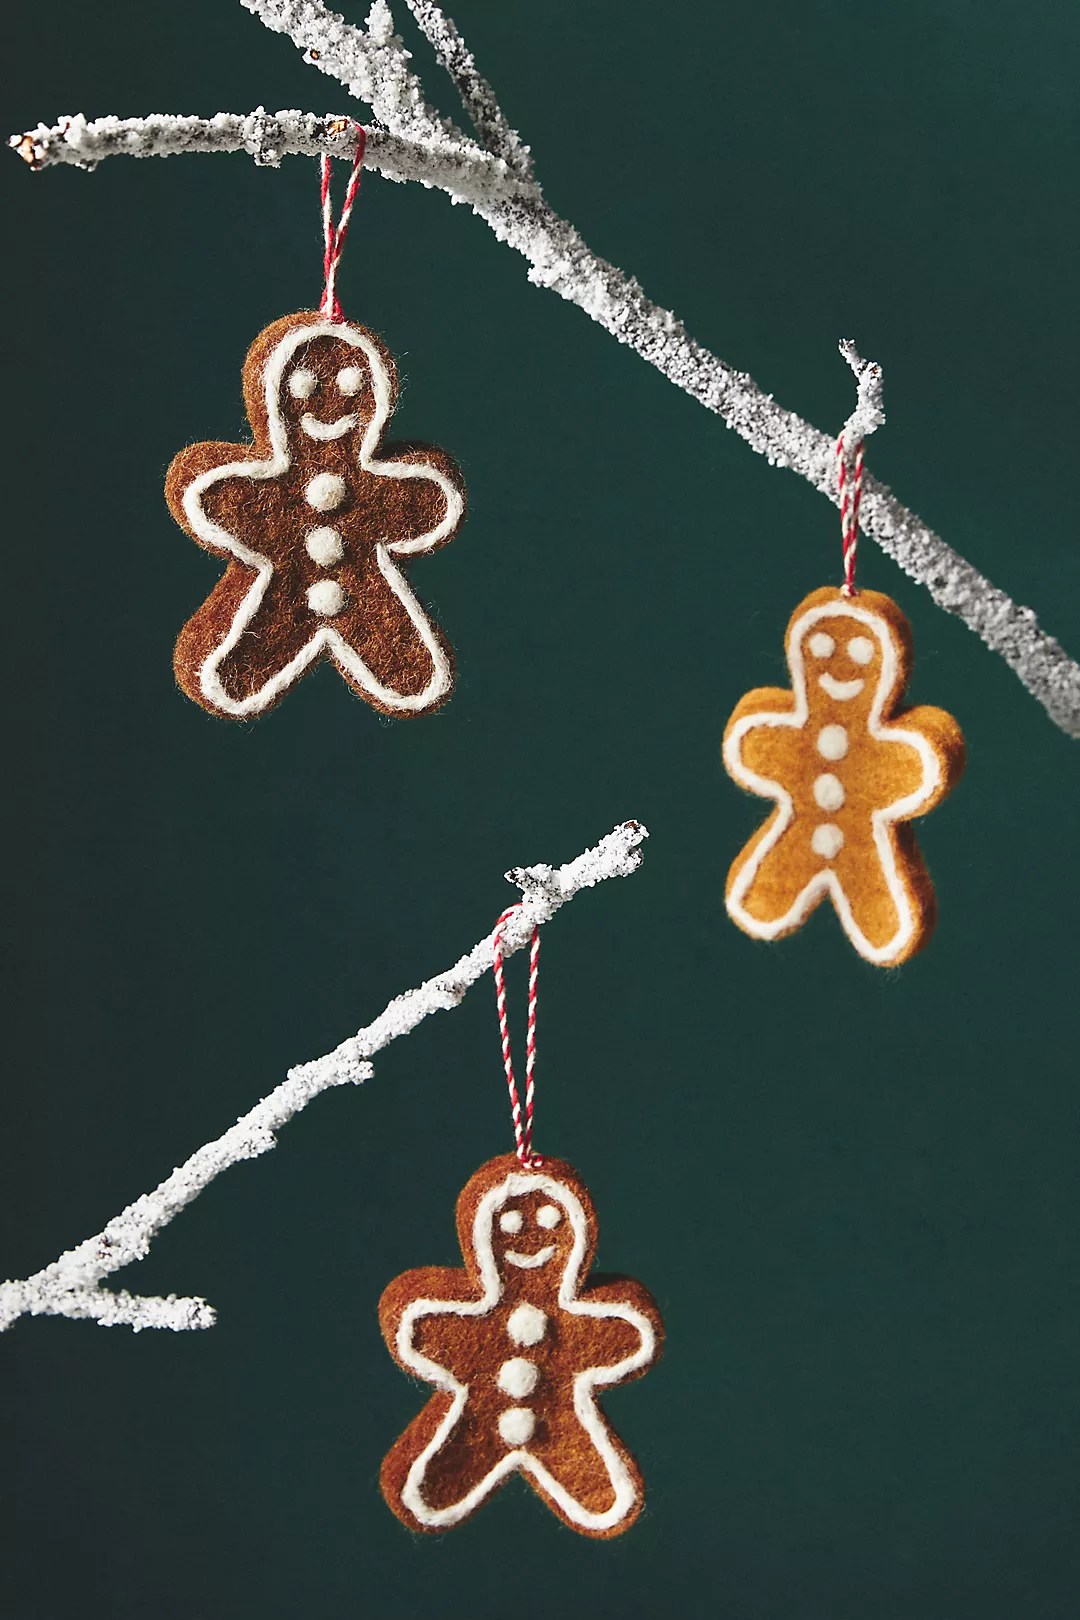 Gingerbread Christmas ornaments from the anthropologie black friday sale hanging from a tree branch on a dark green background